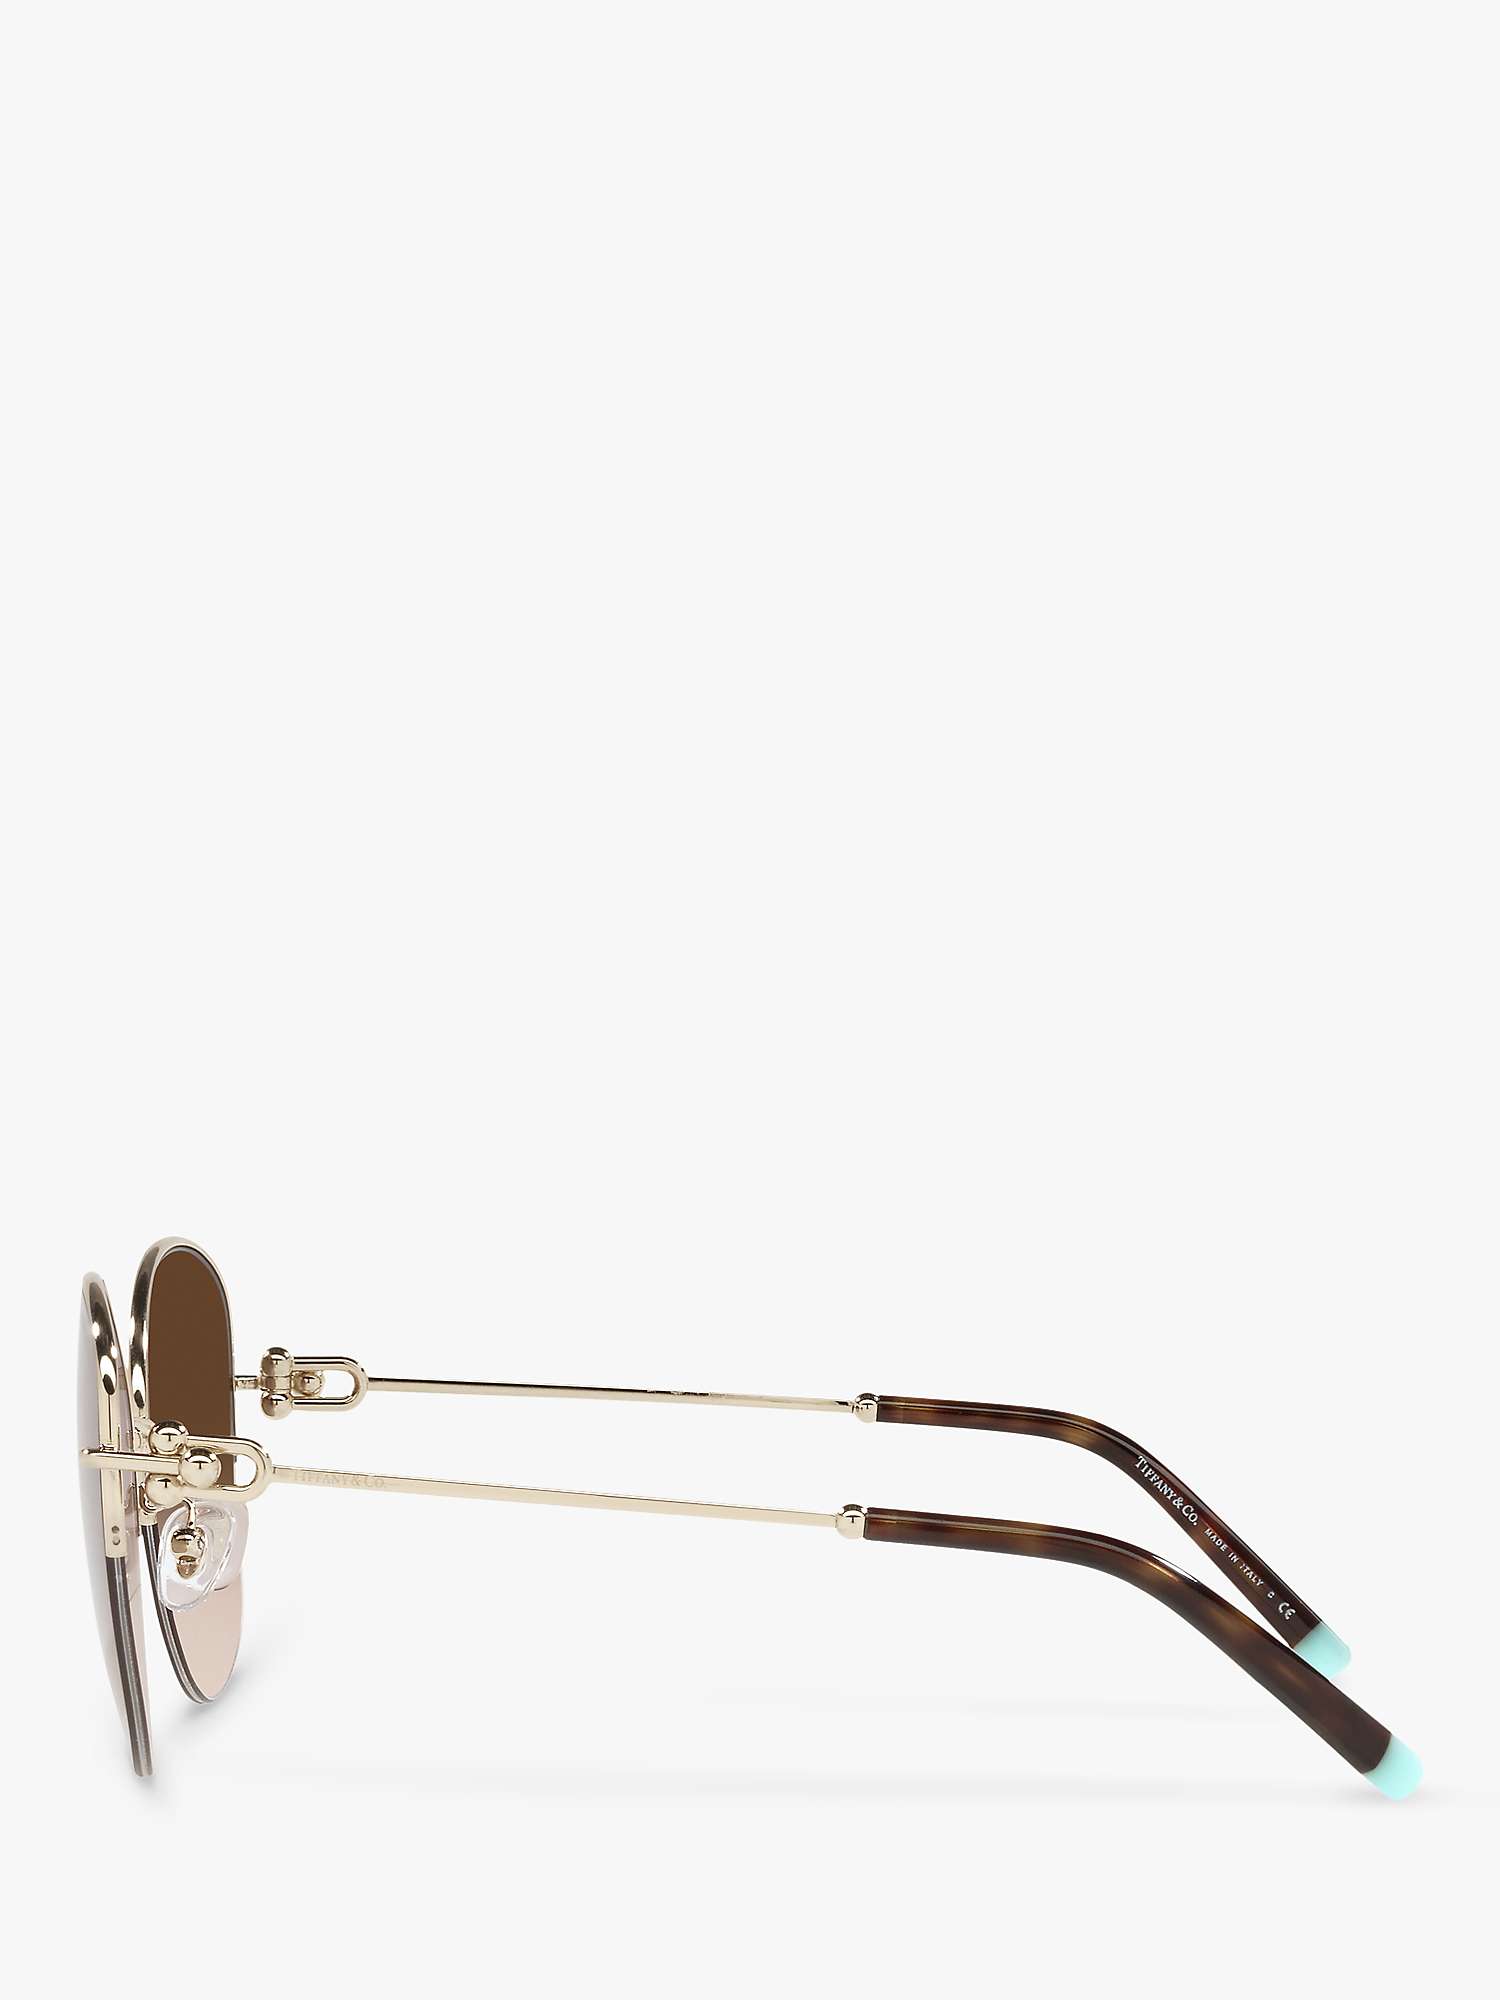 Buy Tiffany & Co TF3082 Women's Pillow Shape Sunglasses, Pale Gold/Brown Gradient Online at johnlewis.com